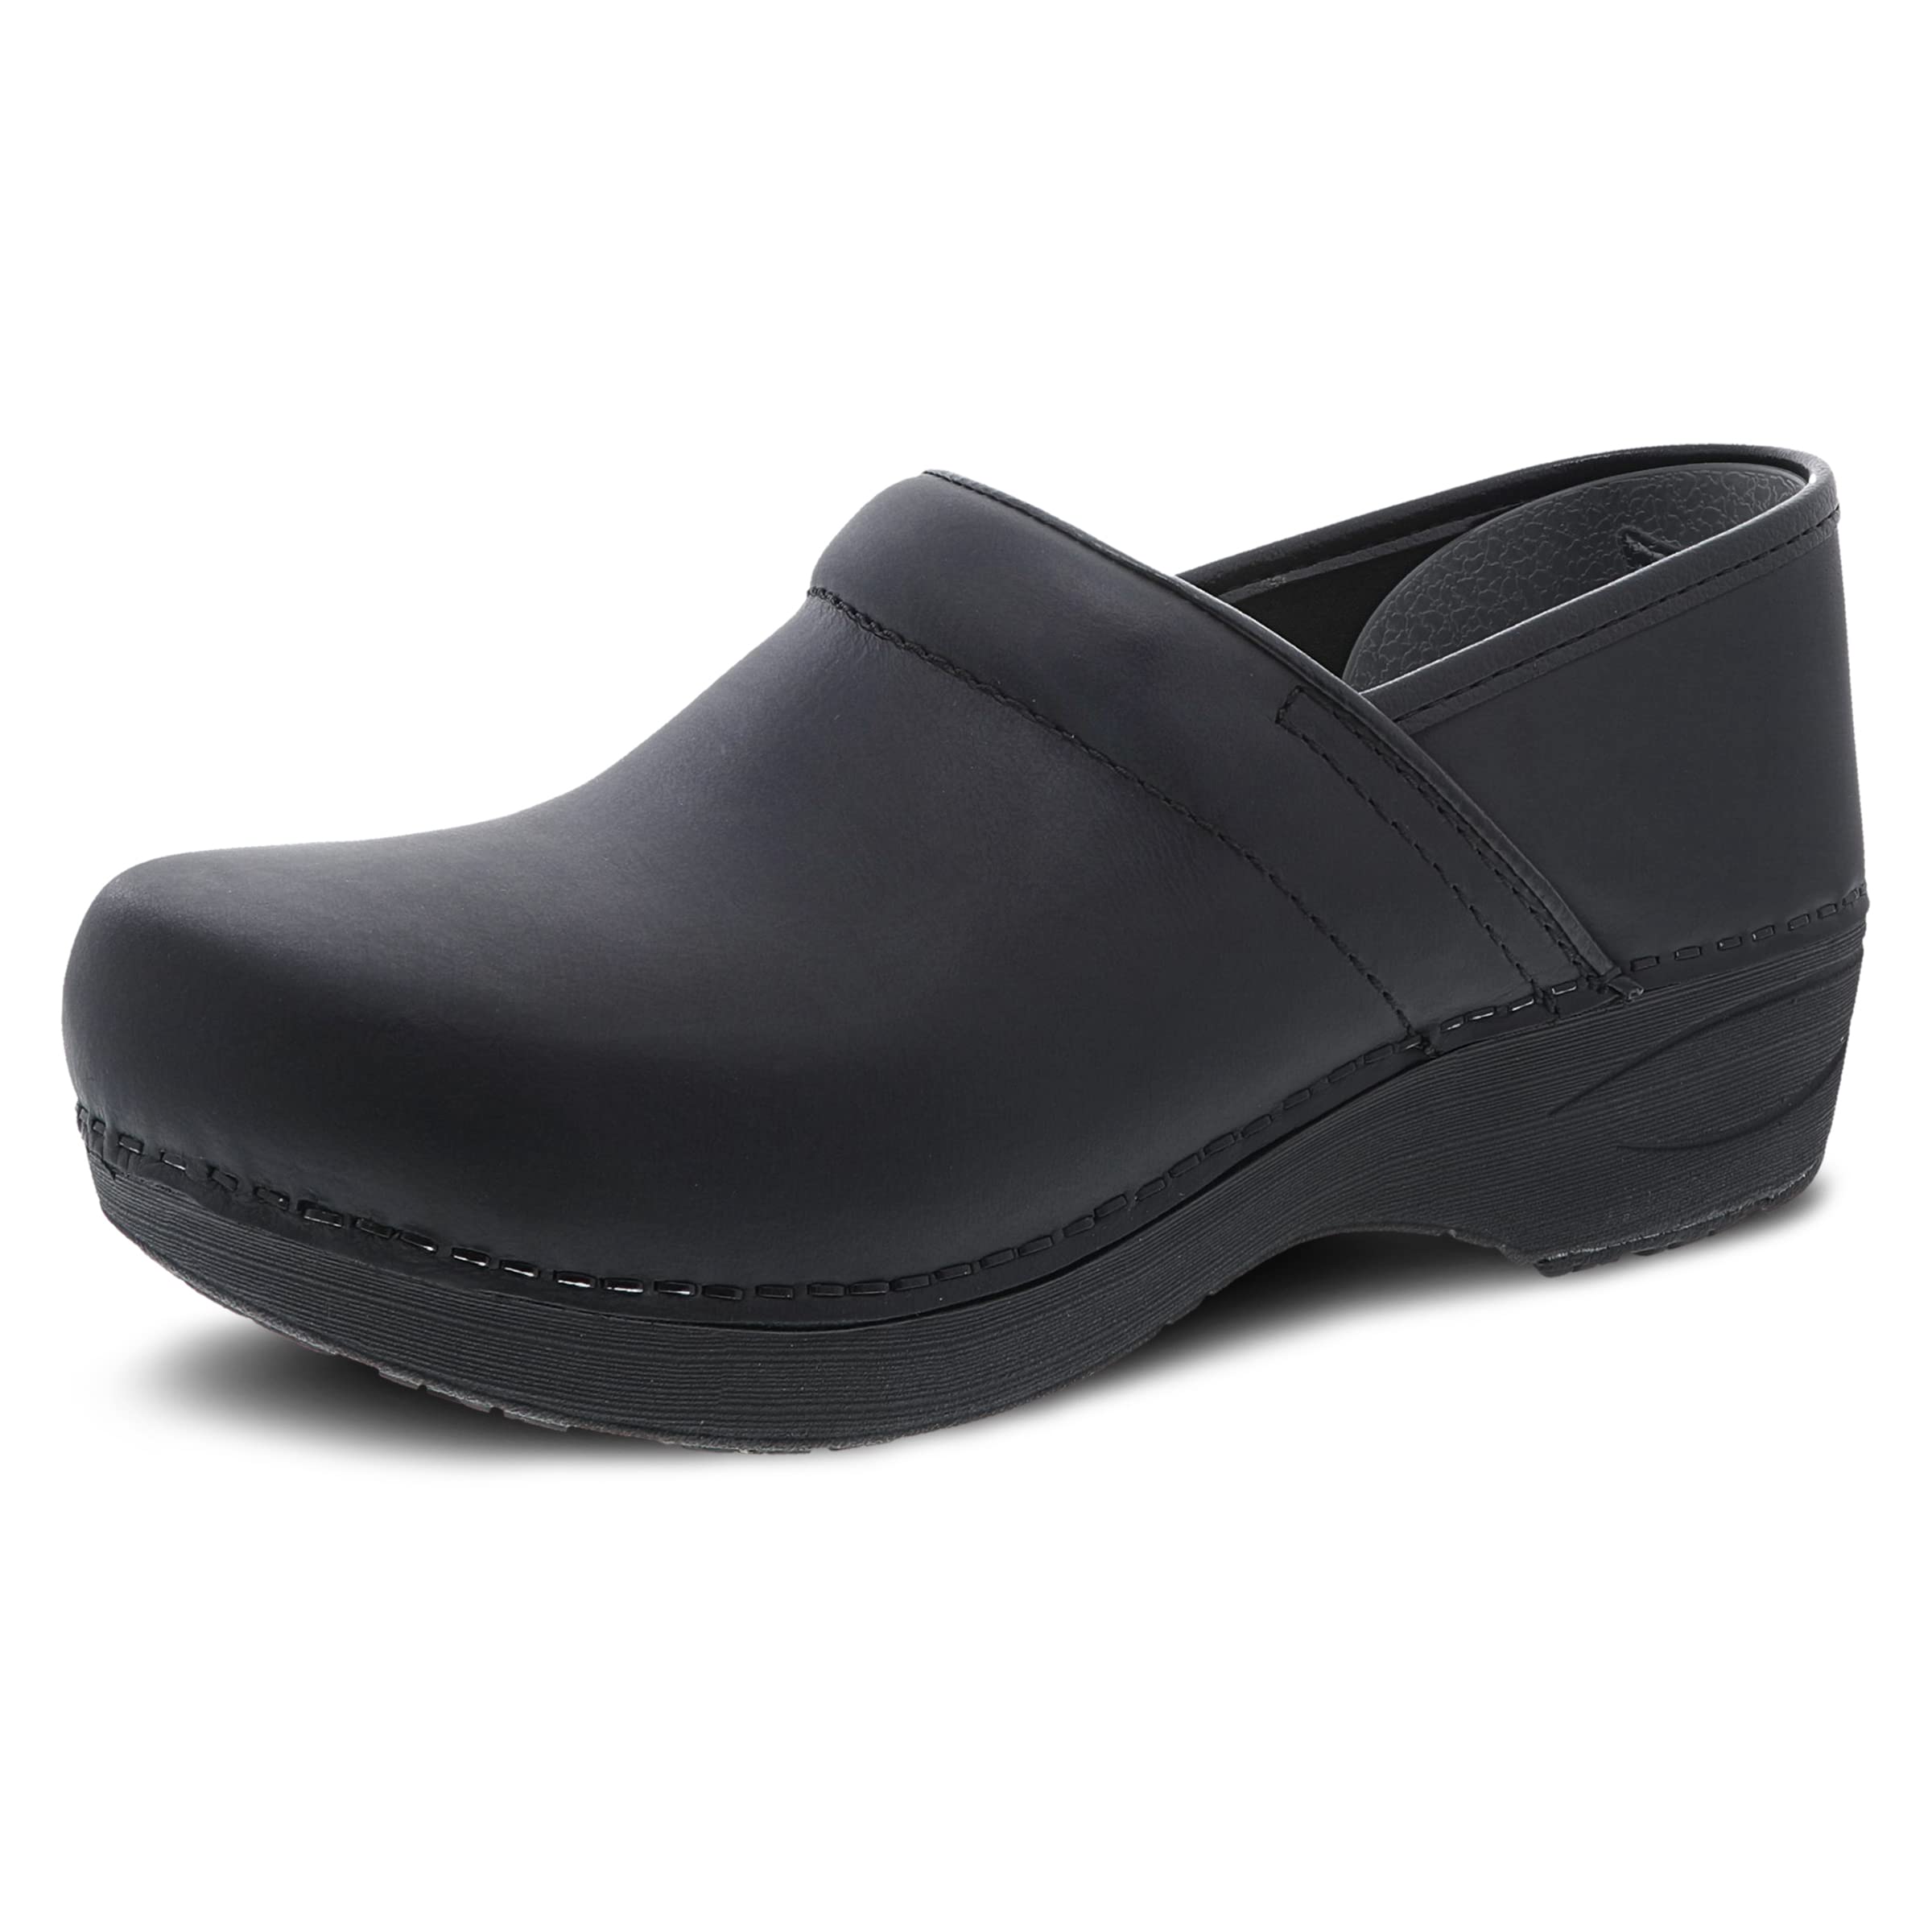 Dansko XP 2.0 Clogs for Women – Lightweight Slip-Resistant Footwear for Comfort and Support –Ideal for Long Standing Professionals –Food Service, Healthcare Professionals